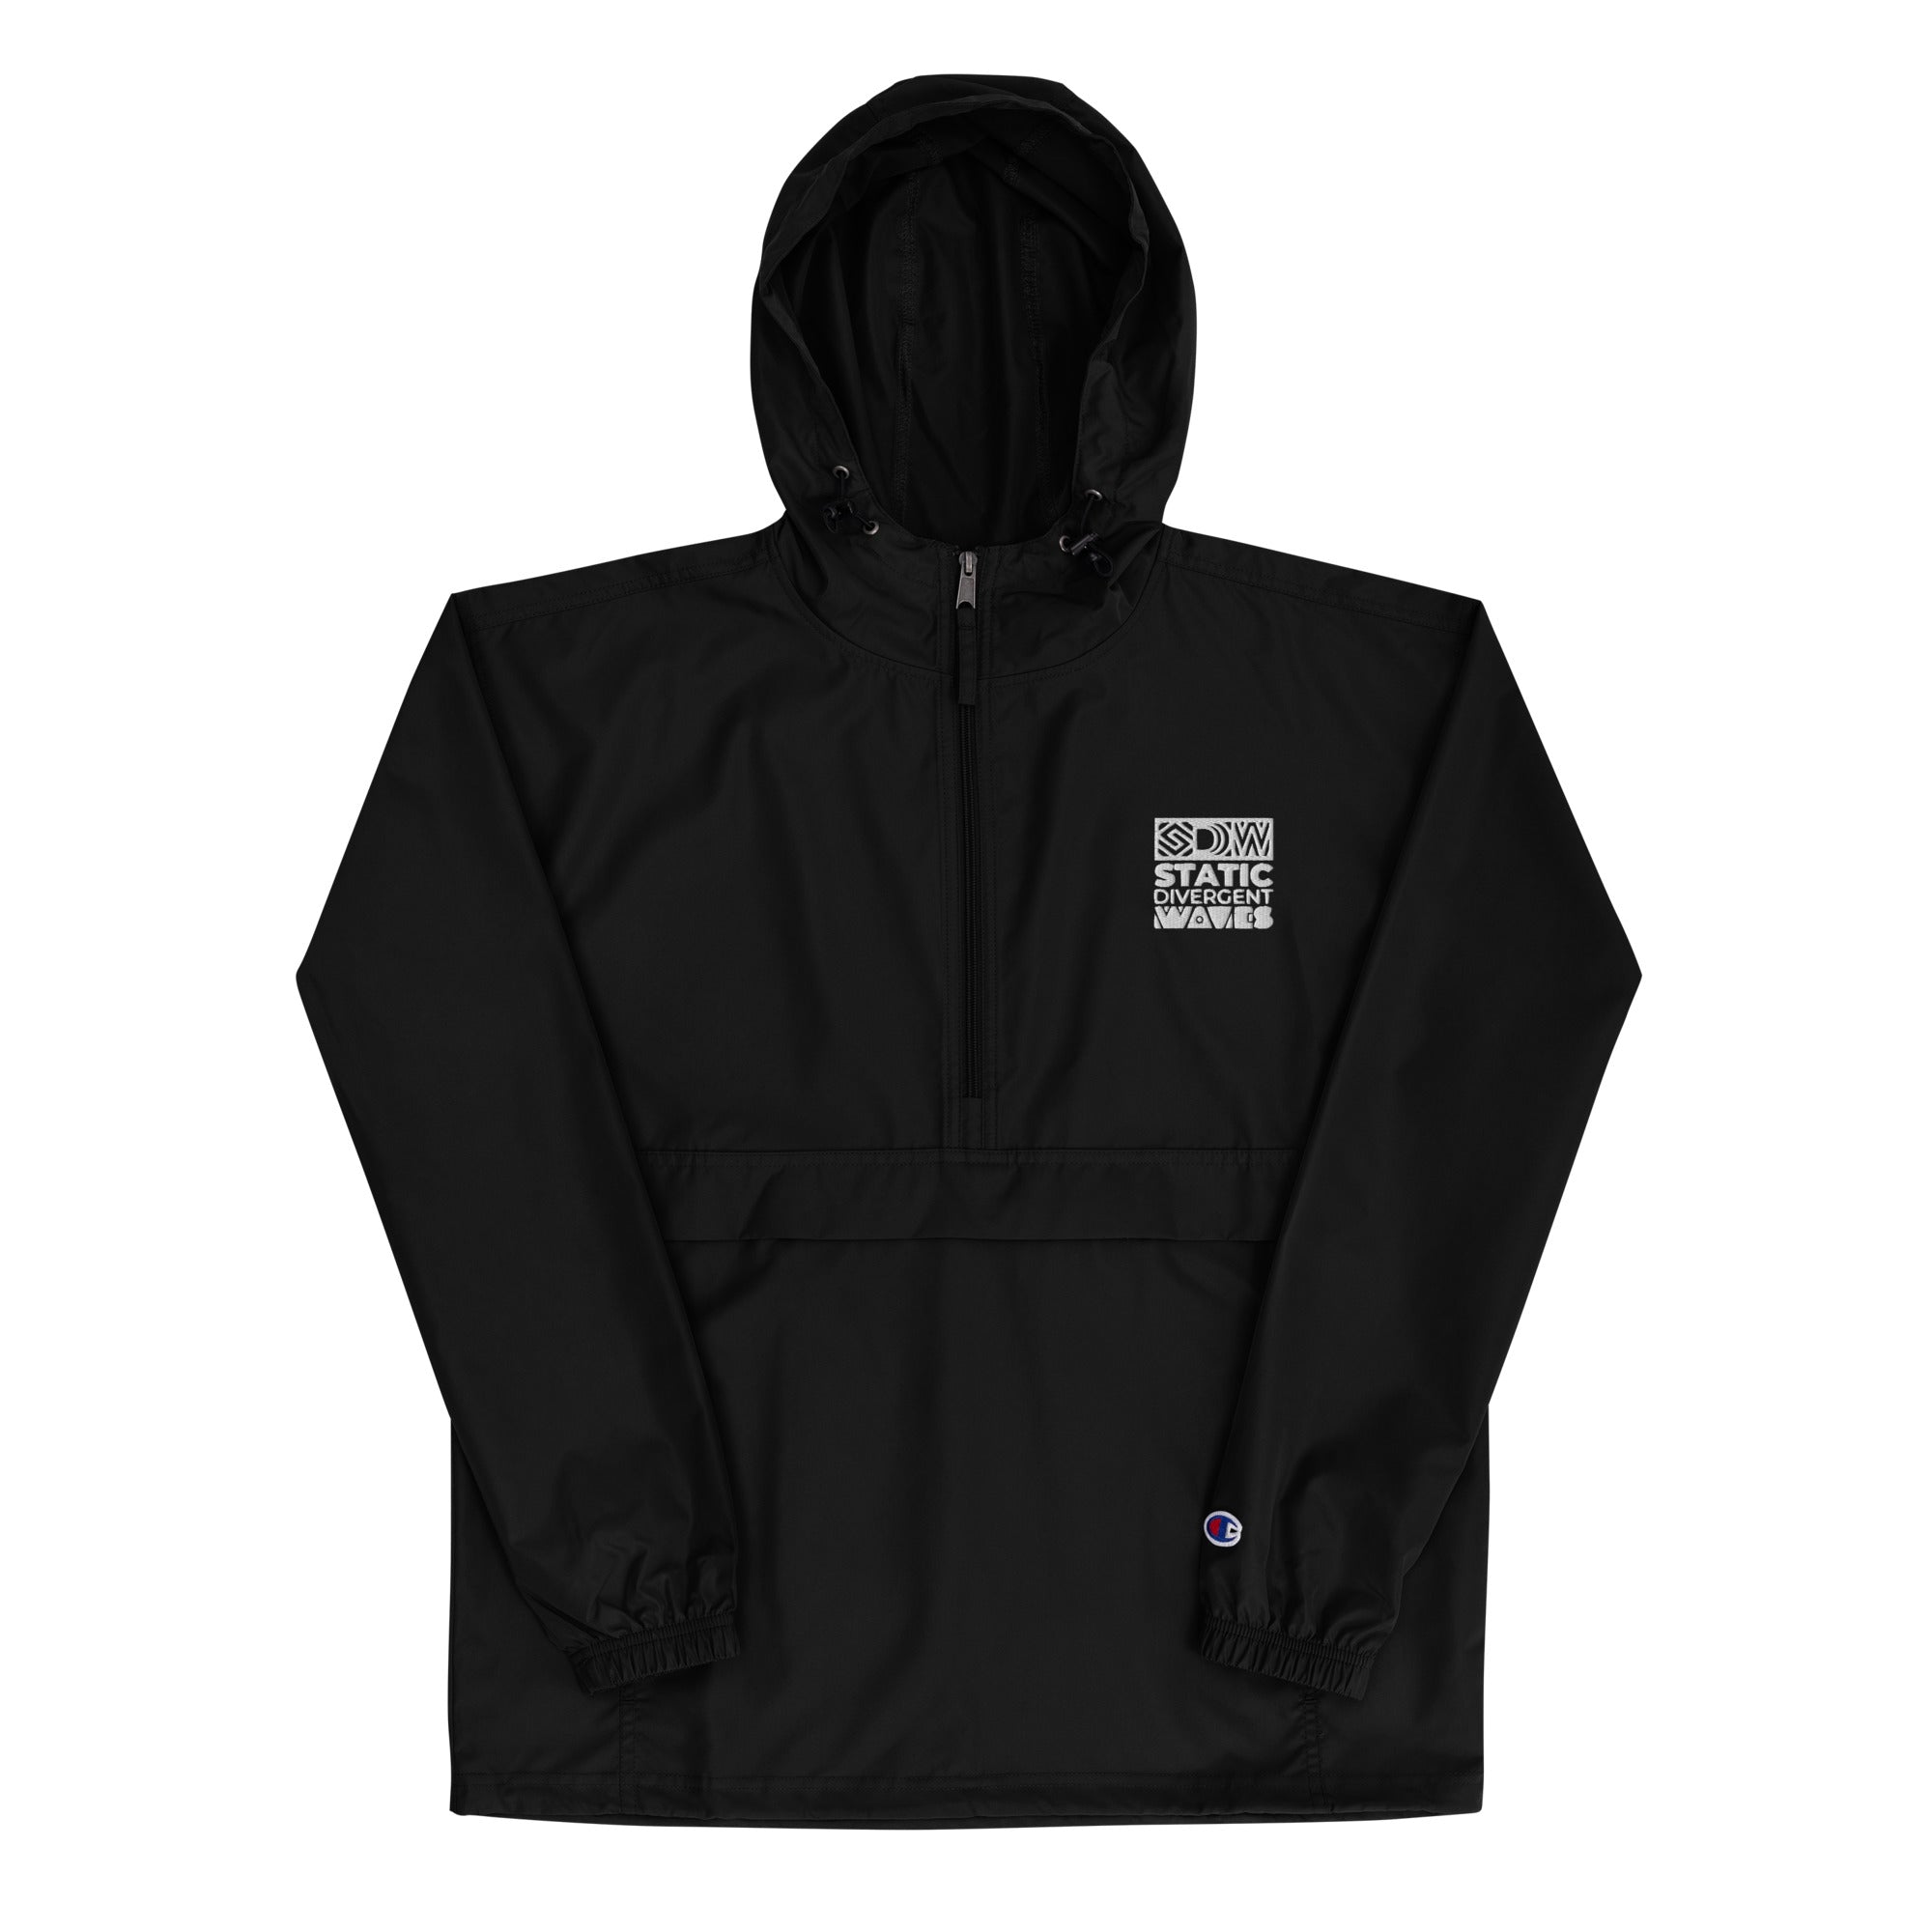 SDW - Embroidered Champion Packable Jacket